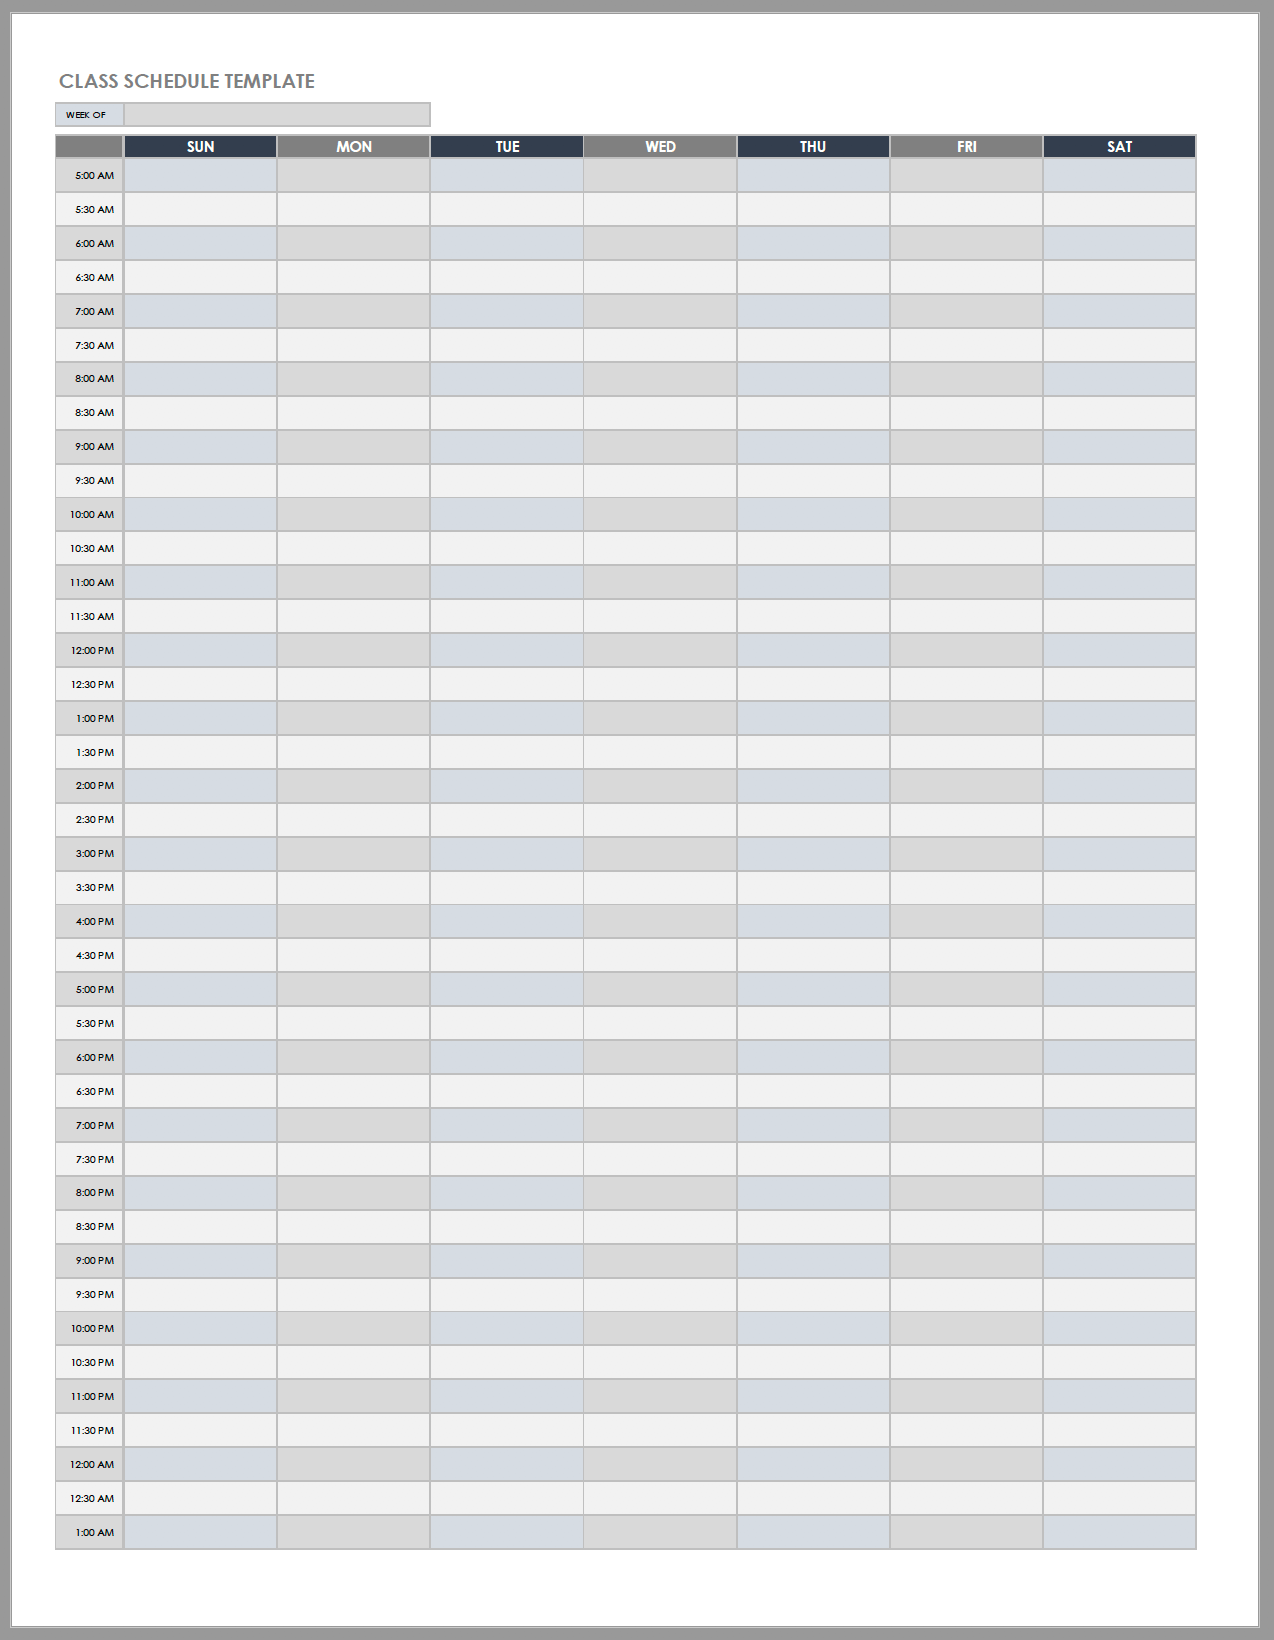 Daily Class Schedule Template from www.smartsheet.com